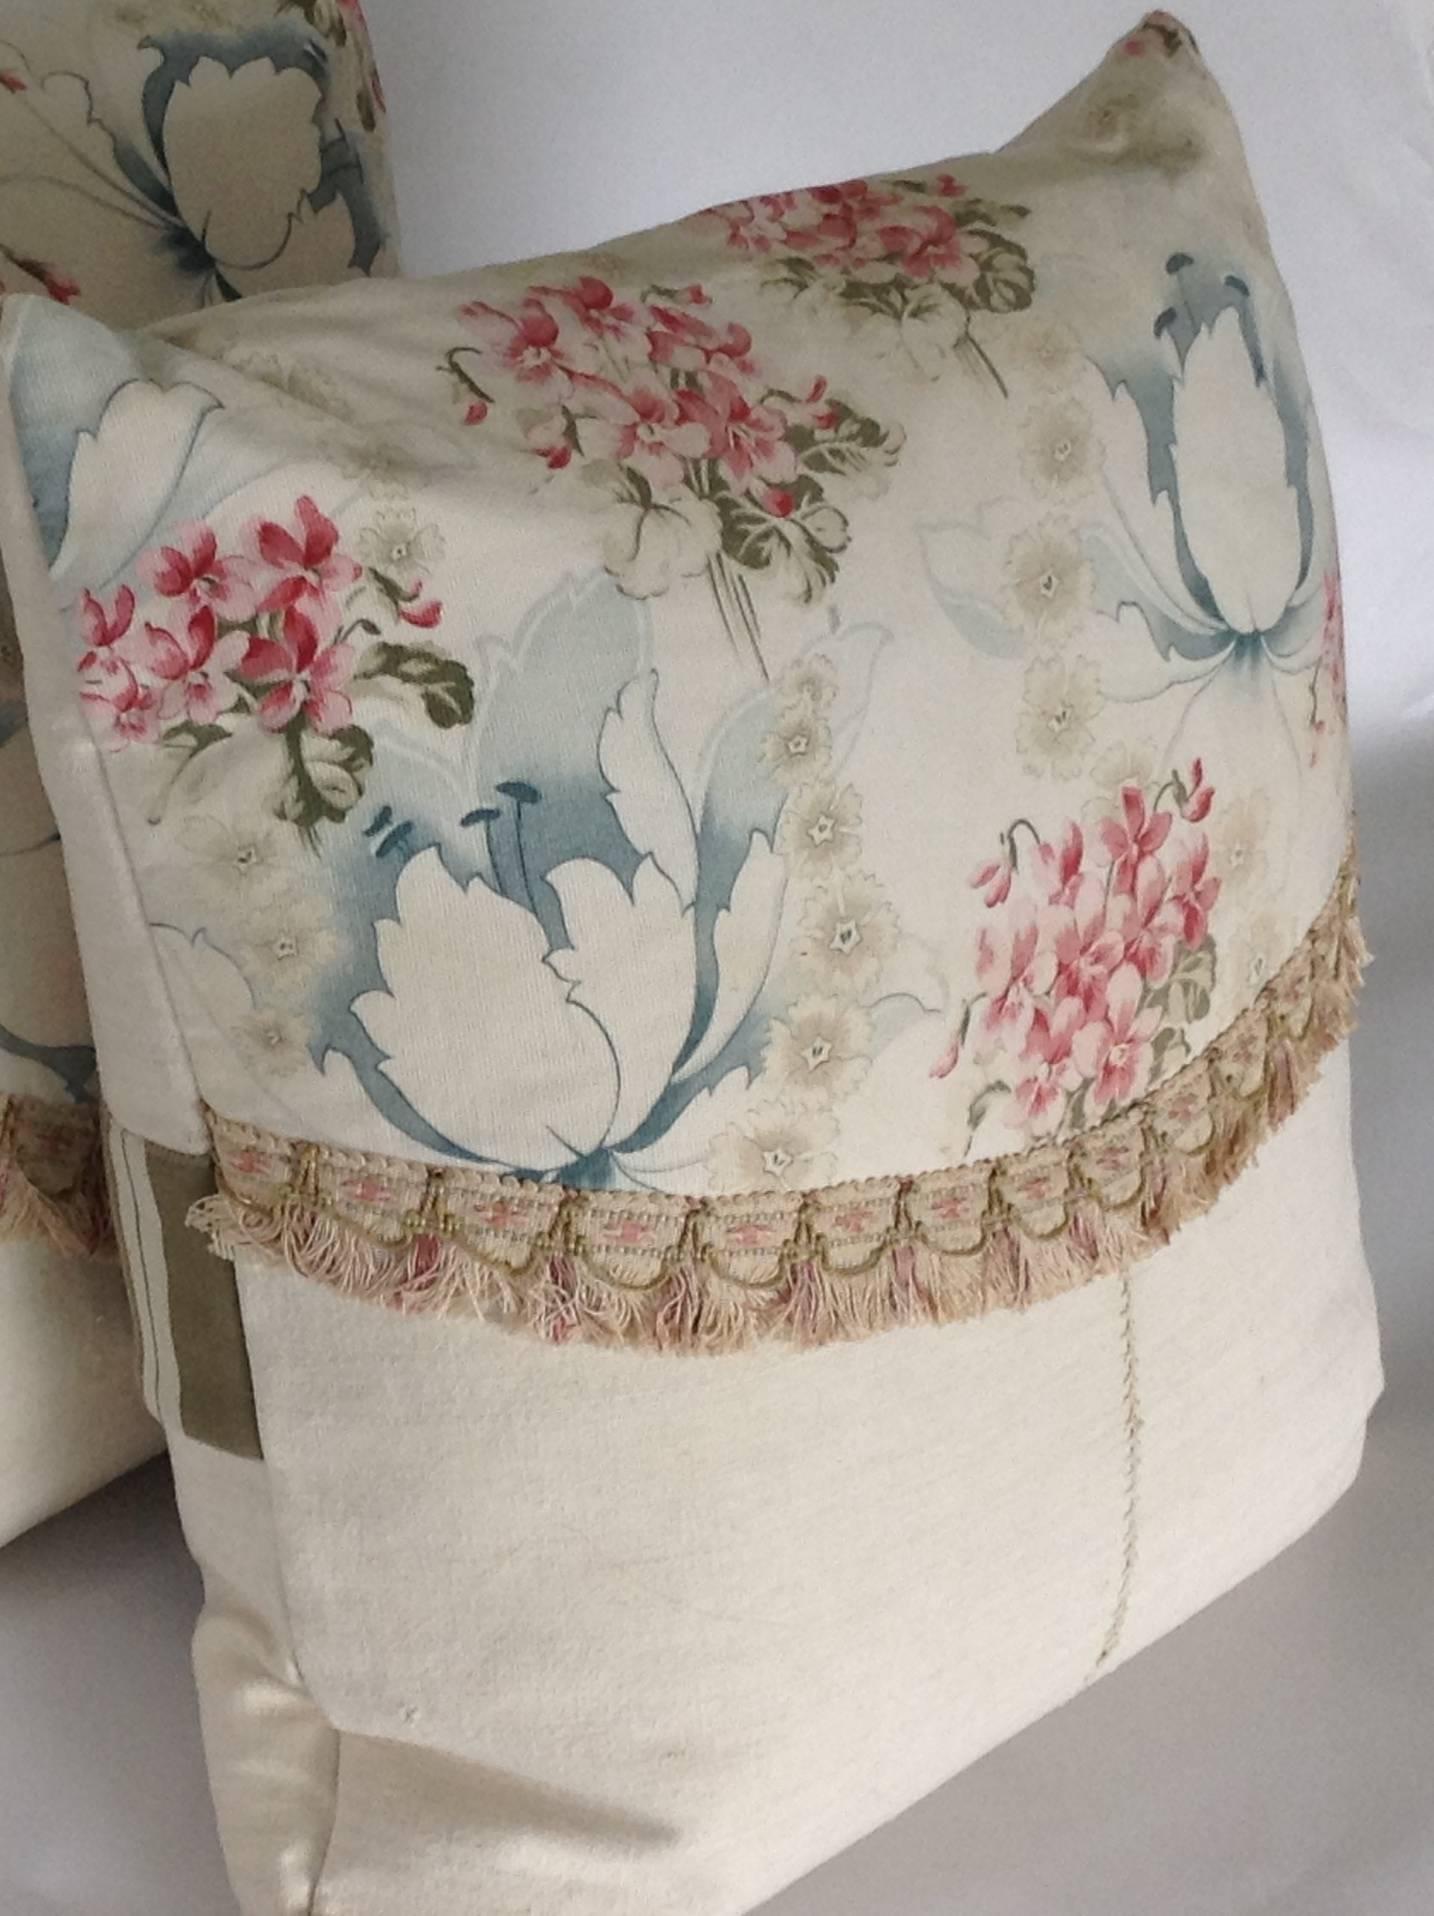 This fabulous handmade pair of features:

An antique French printed cotton and homespun linen accented with a lovely cotton trim.
Notice the incredible detail on the linen. Two home spun panels where hand-stitched together creating the beautiful